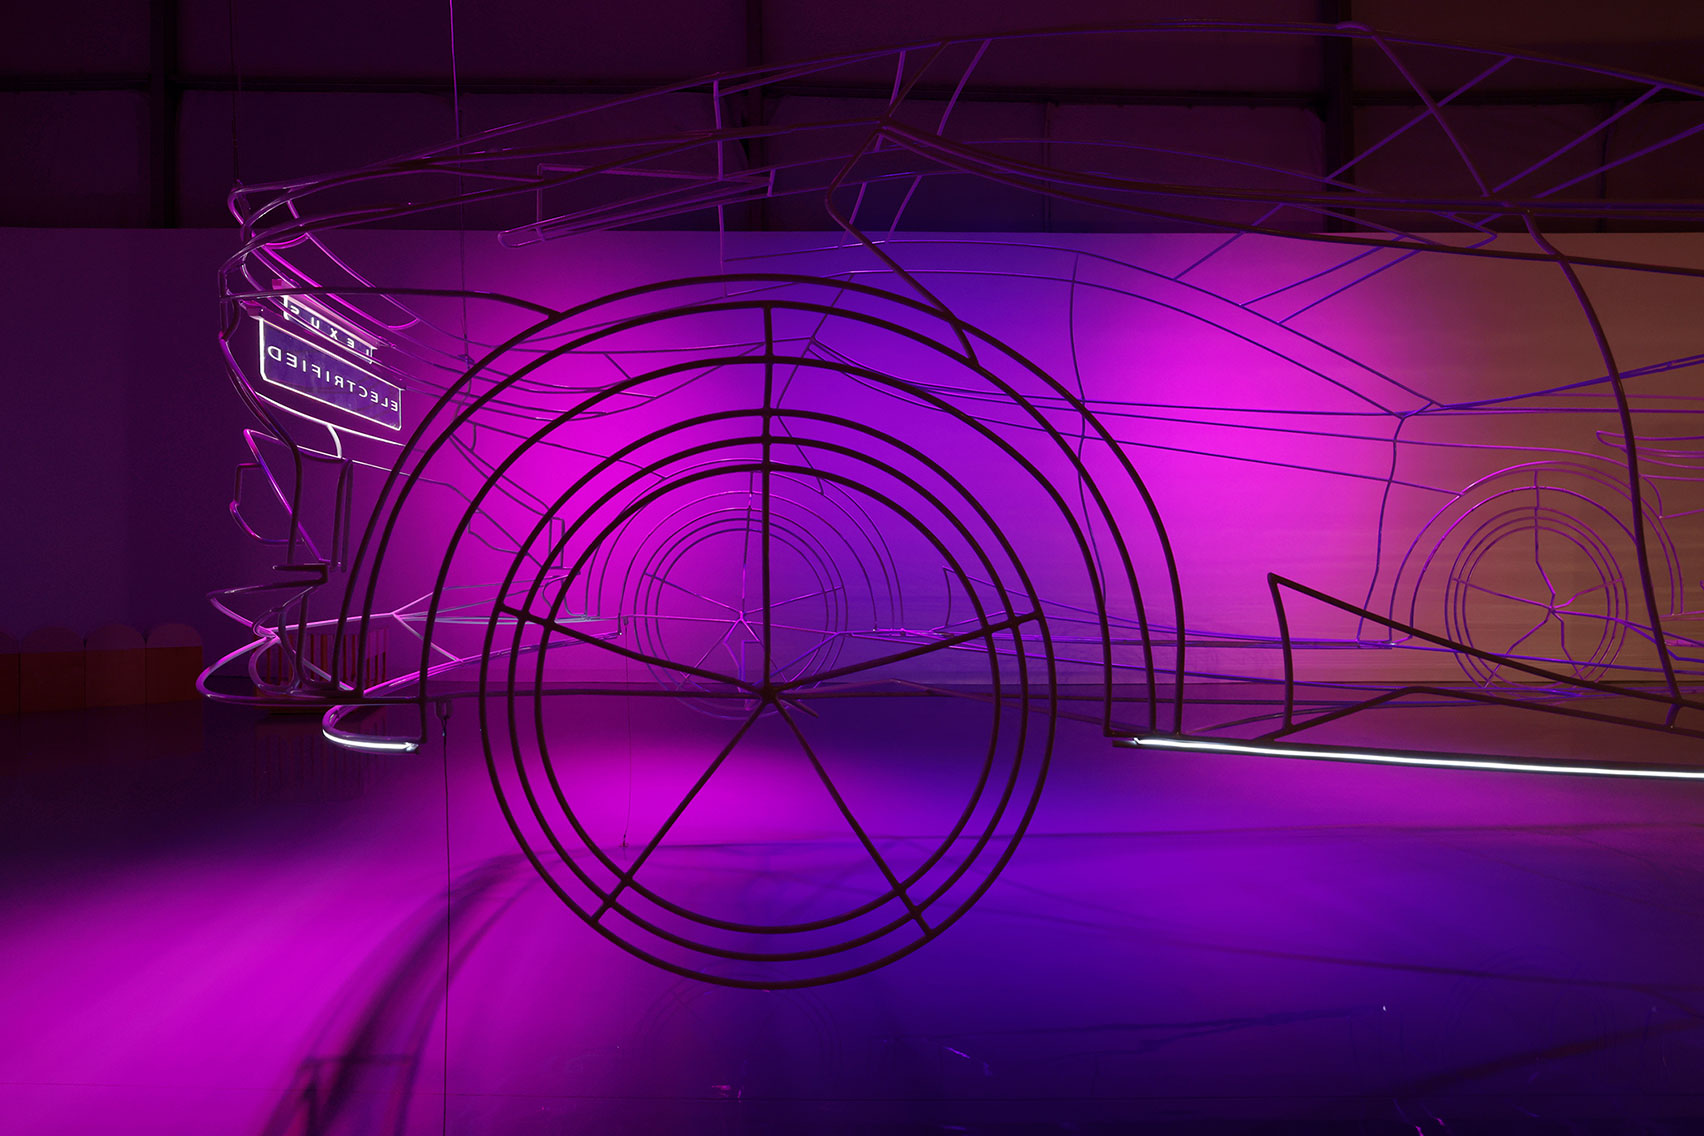 ON/ installation by Germane Barnes and the University of Miami for Lexus